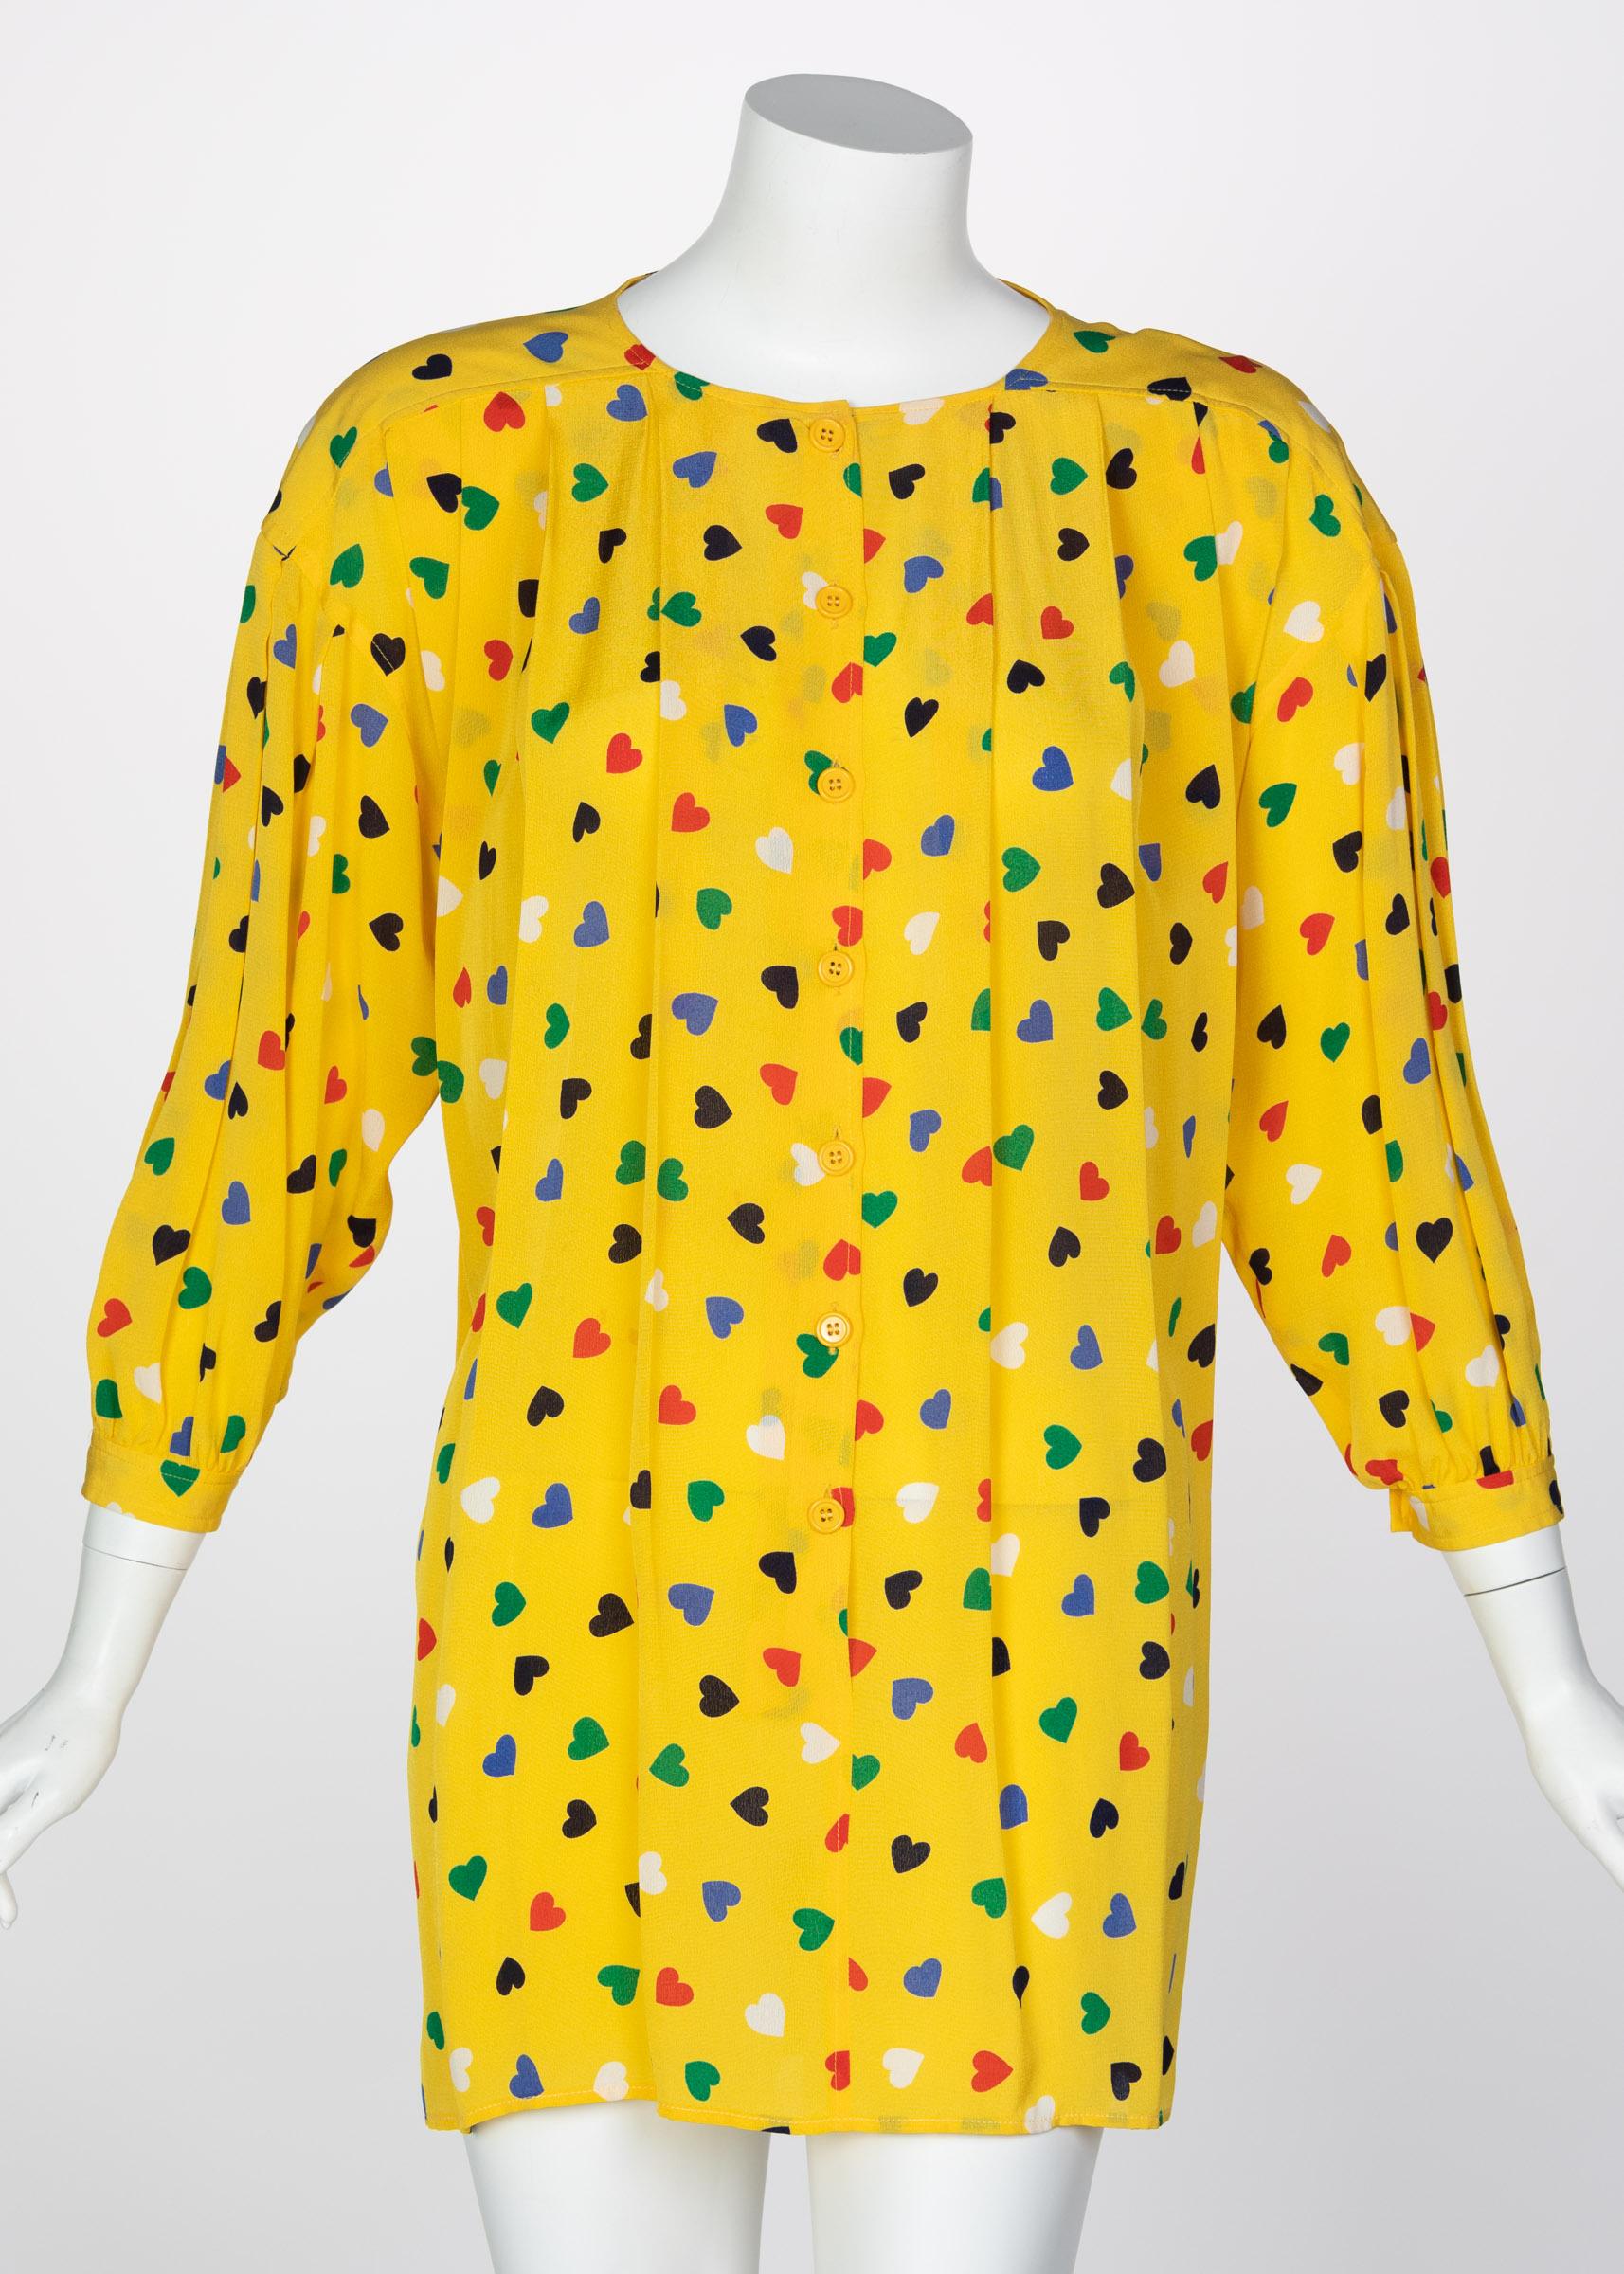 One of the most notable designers of the 1960s alongside the likes of Cardin and Courregès, Emanuel Ungaro stood out by his loud color combinations and often eccentric prints. While his designs are often lively, they take after a school of